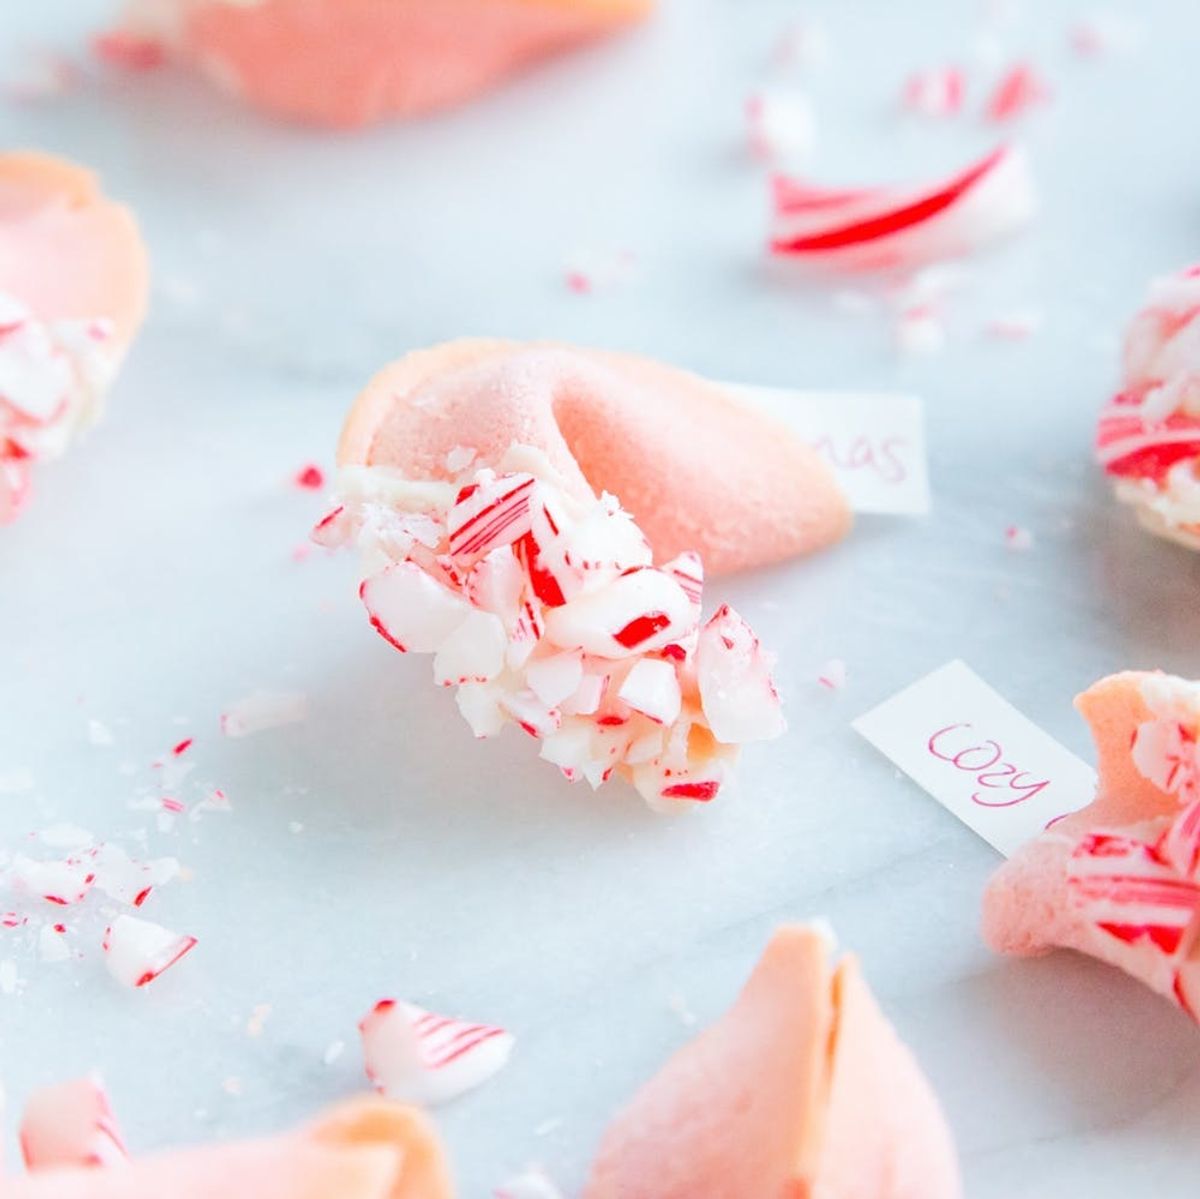 Make These Adorable White Chocolate Candy Cane Fortune Cookies for Your Next Holiday Cookie Swap!